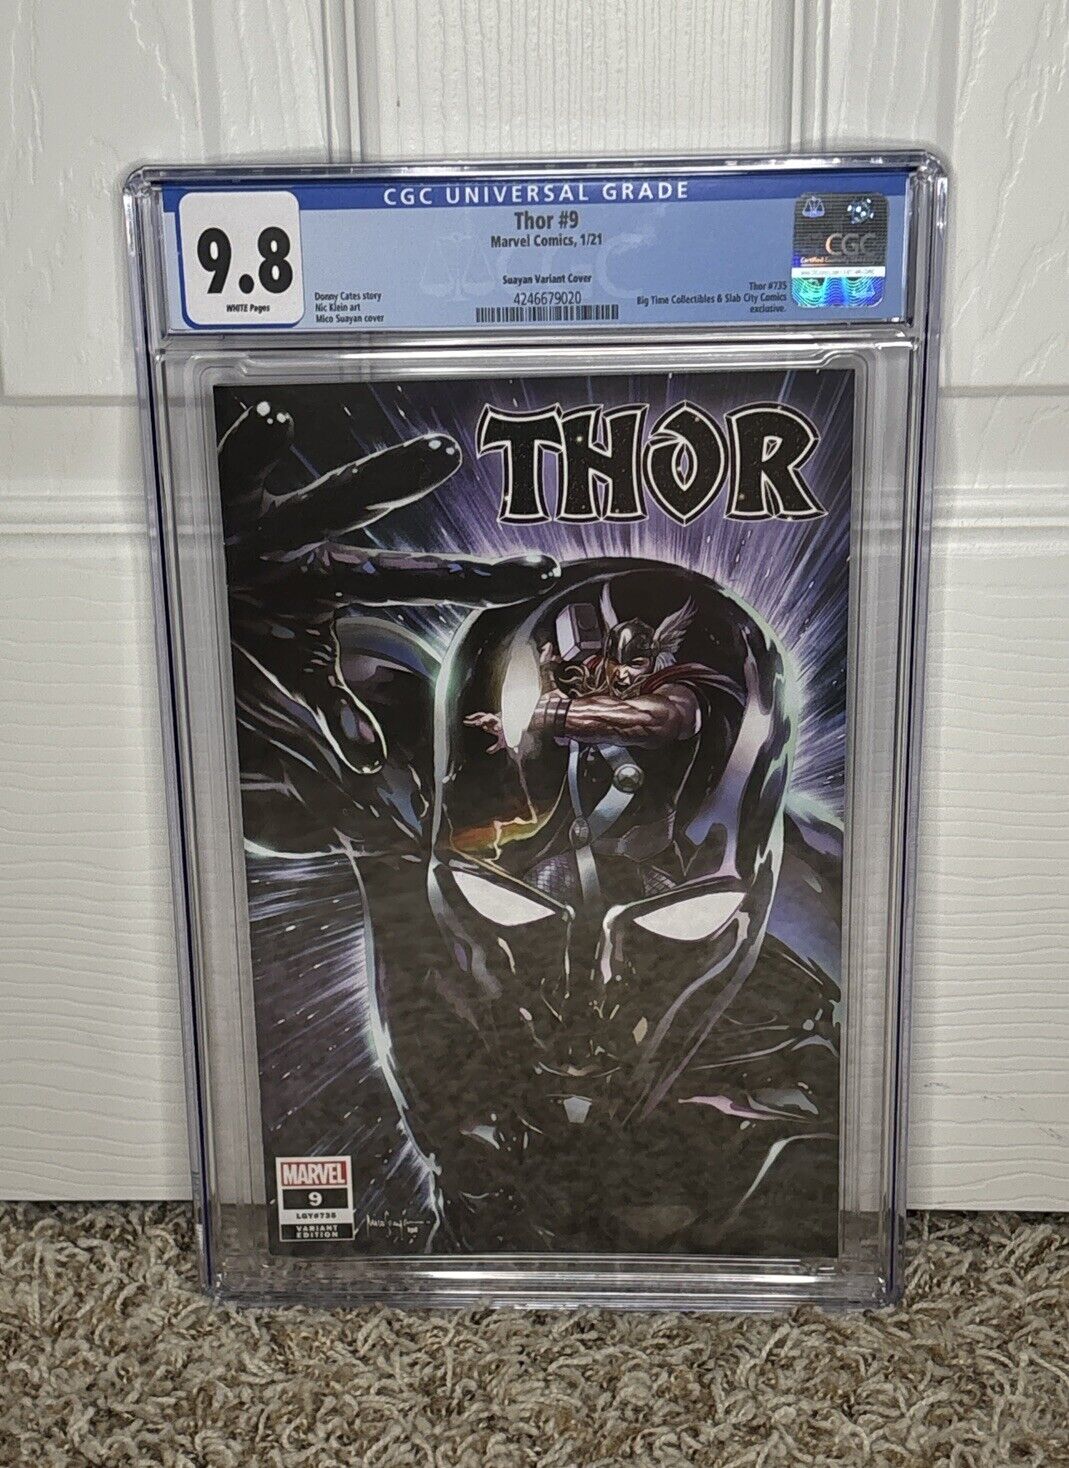 Thor #9 * LGY #735 variant Silver Surfer cover Mico Suayan * CGC 9.8 NM/MT 2021